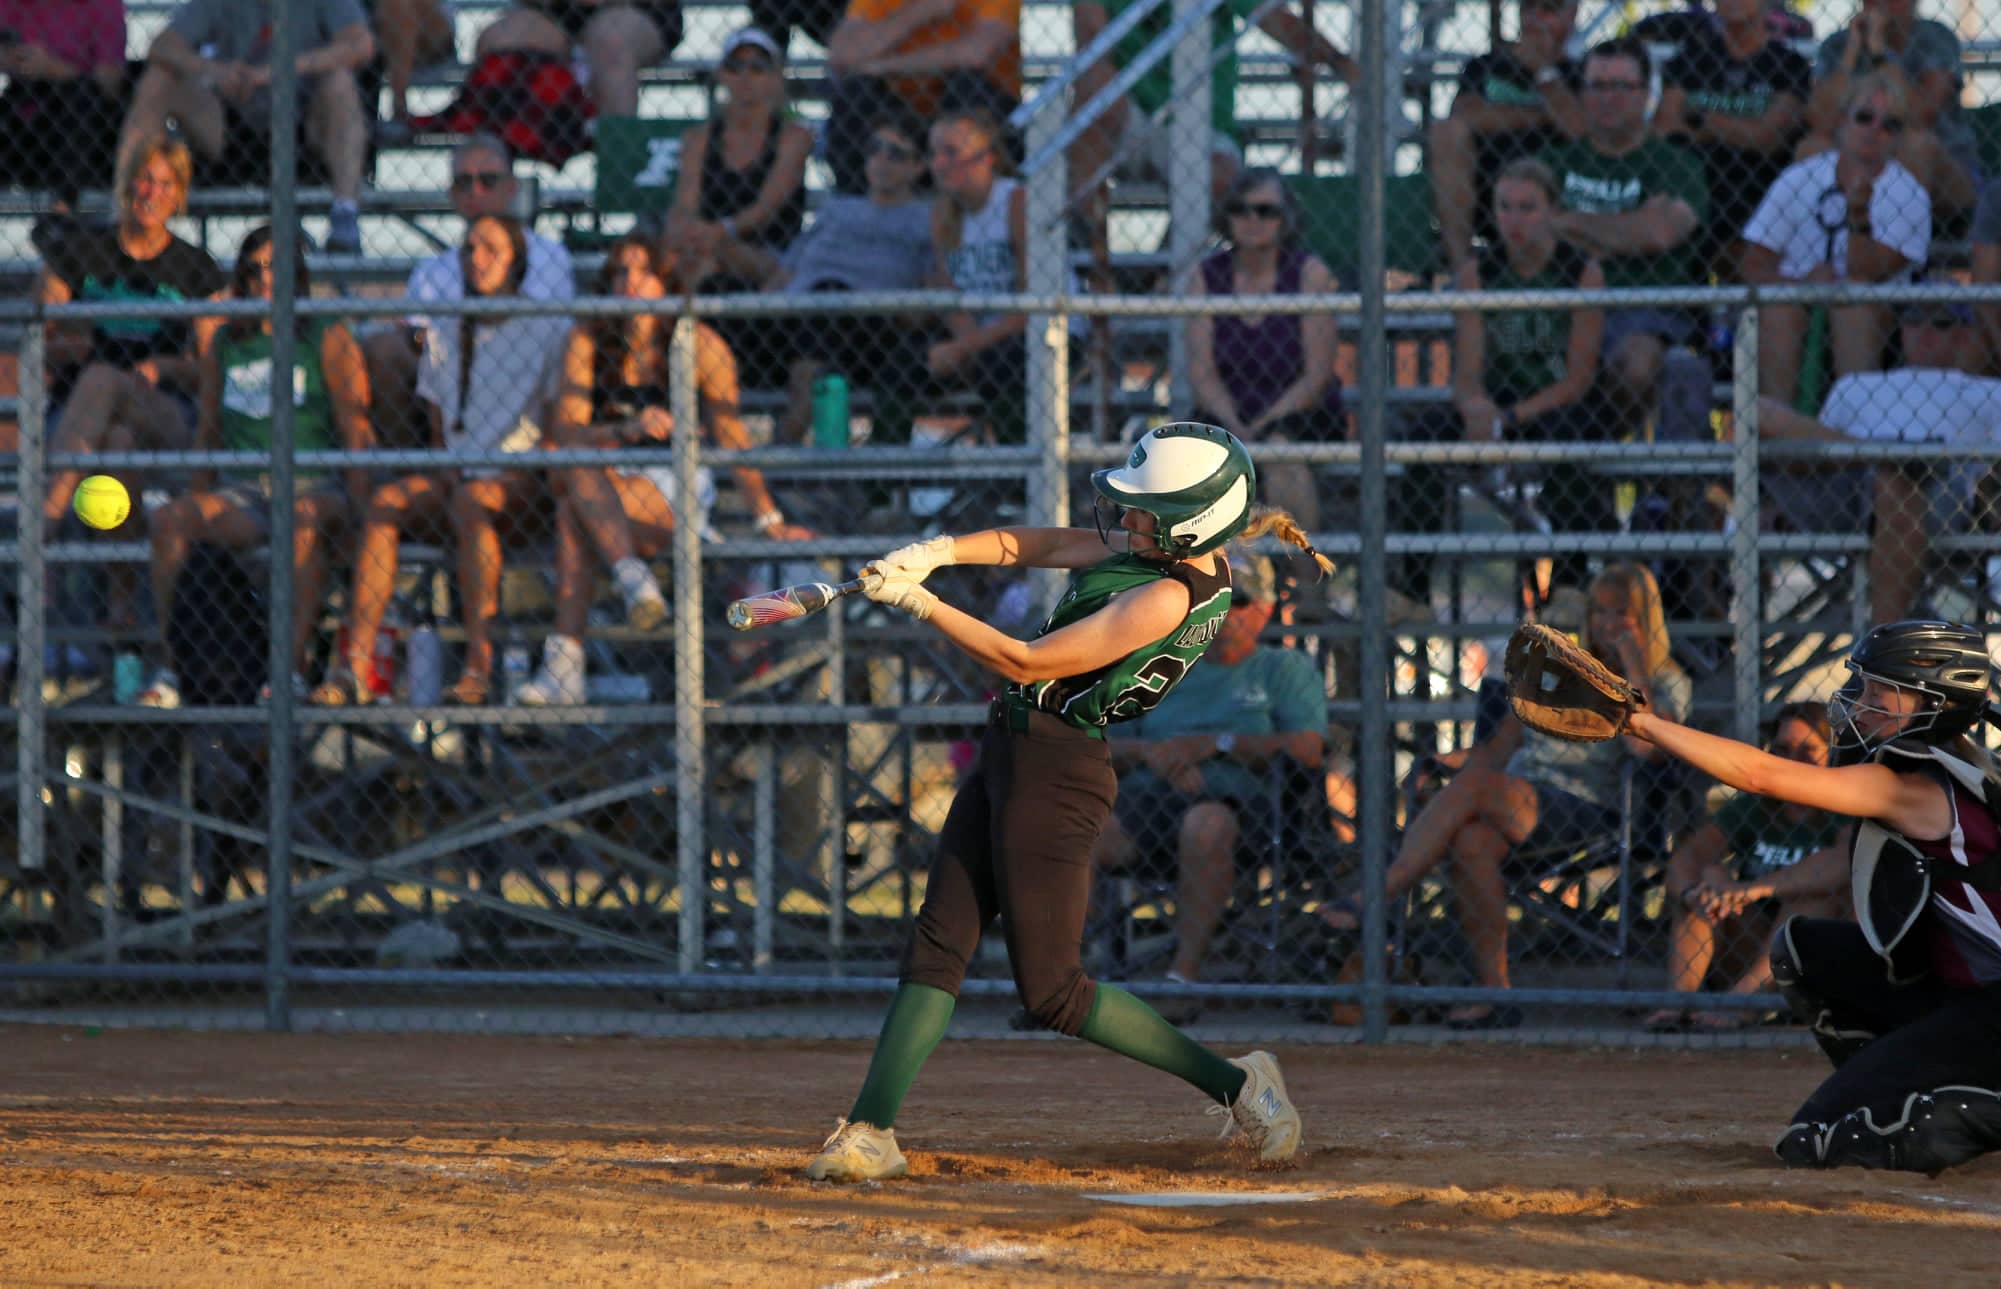 Pella Softball Team Finds First Conference Win Dutch Summer Teams